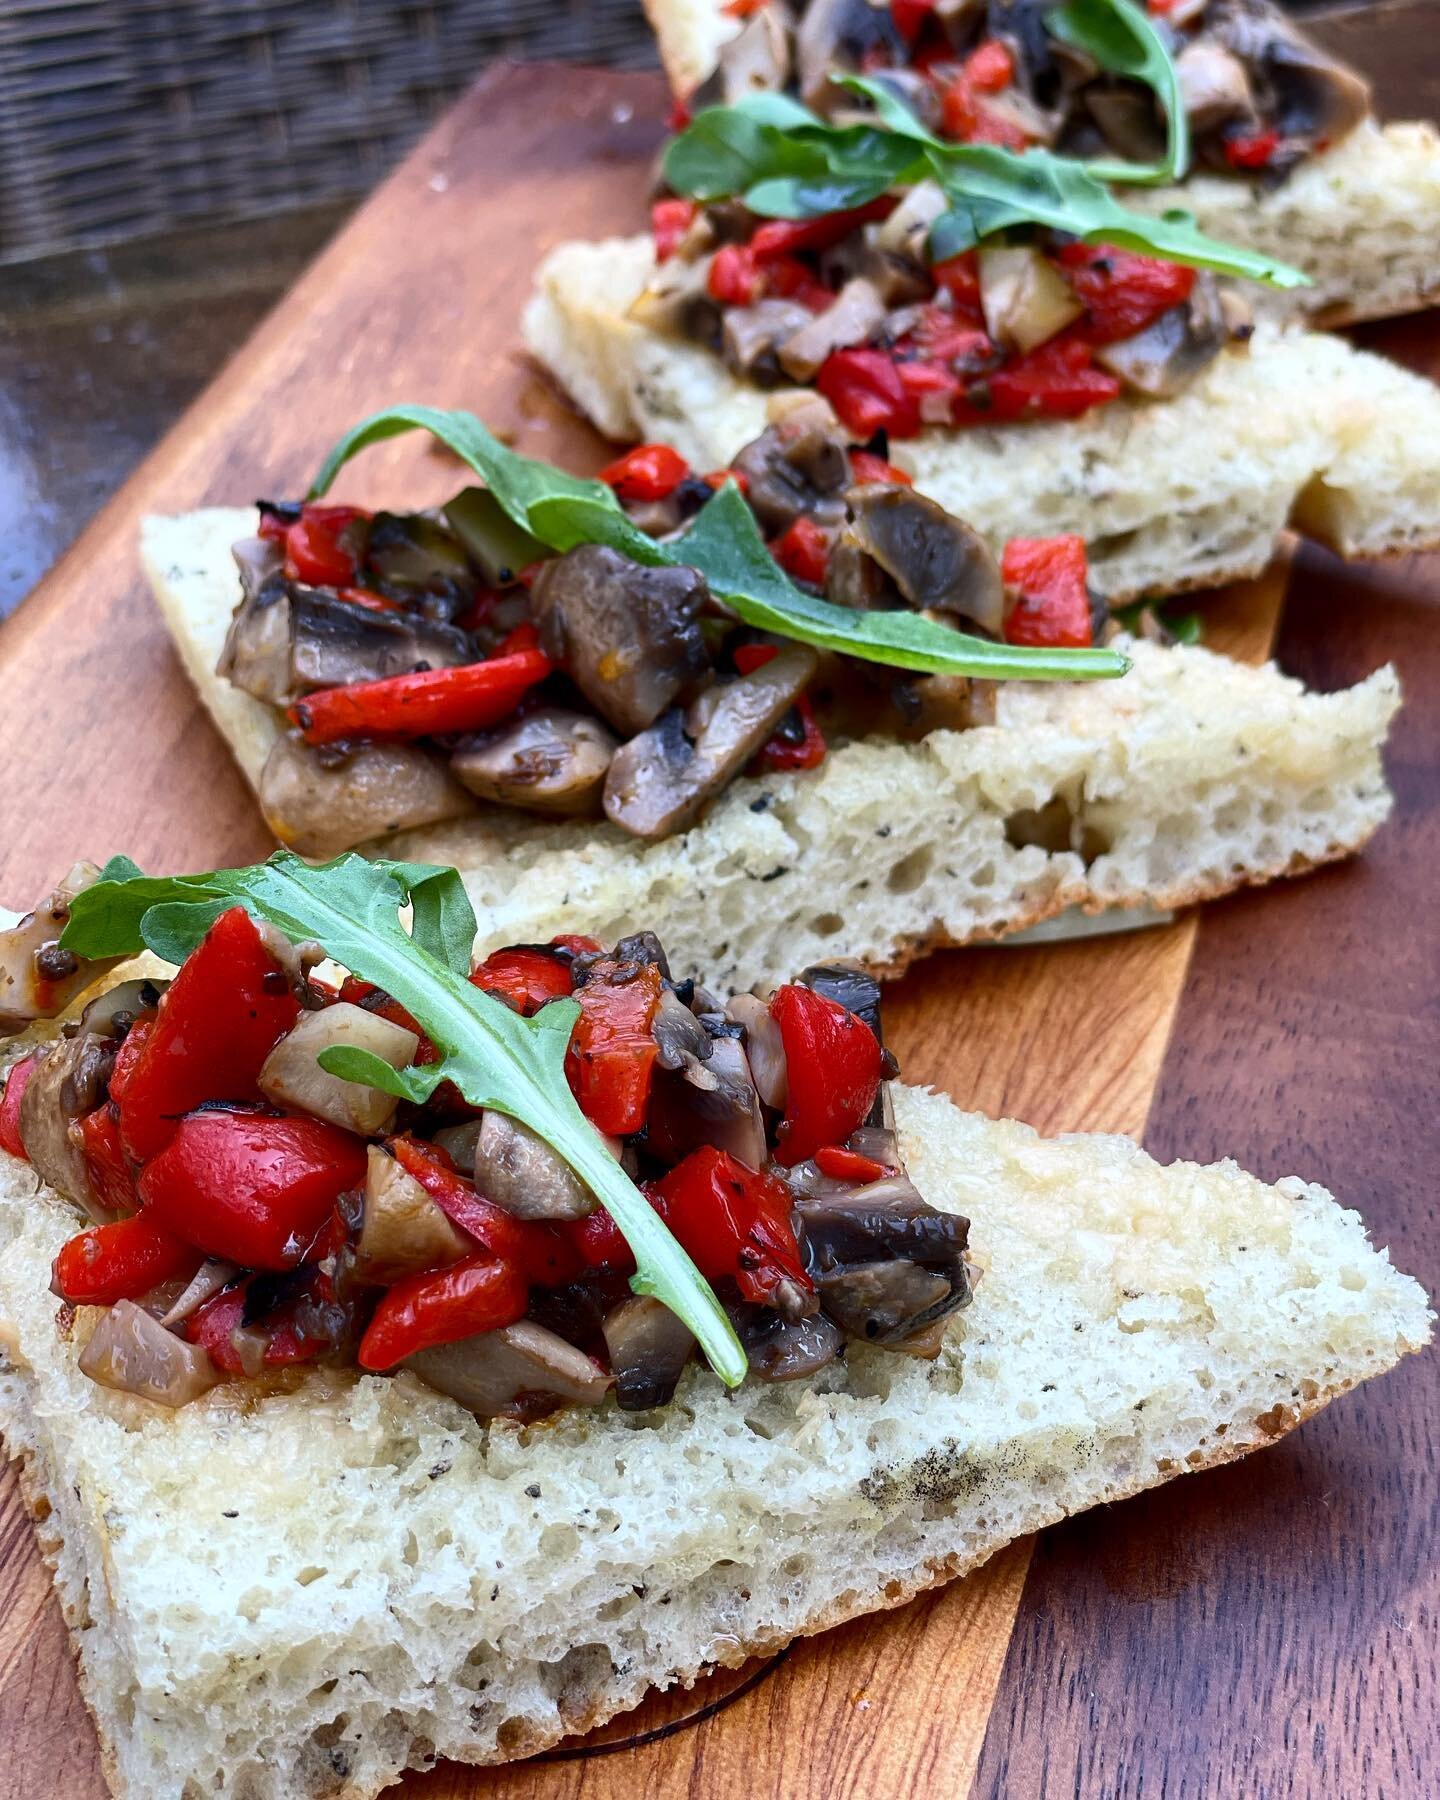 Our new Truffle Mushroom Bruschetta comes with saut&eacute;ed mushrooms, roasted bell peppers on top of cheesy garlic bread made in-house by @cheffogegio ❣️ with a drizzle of truffle oil!